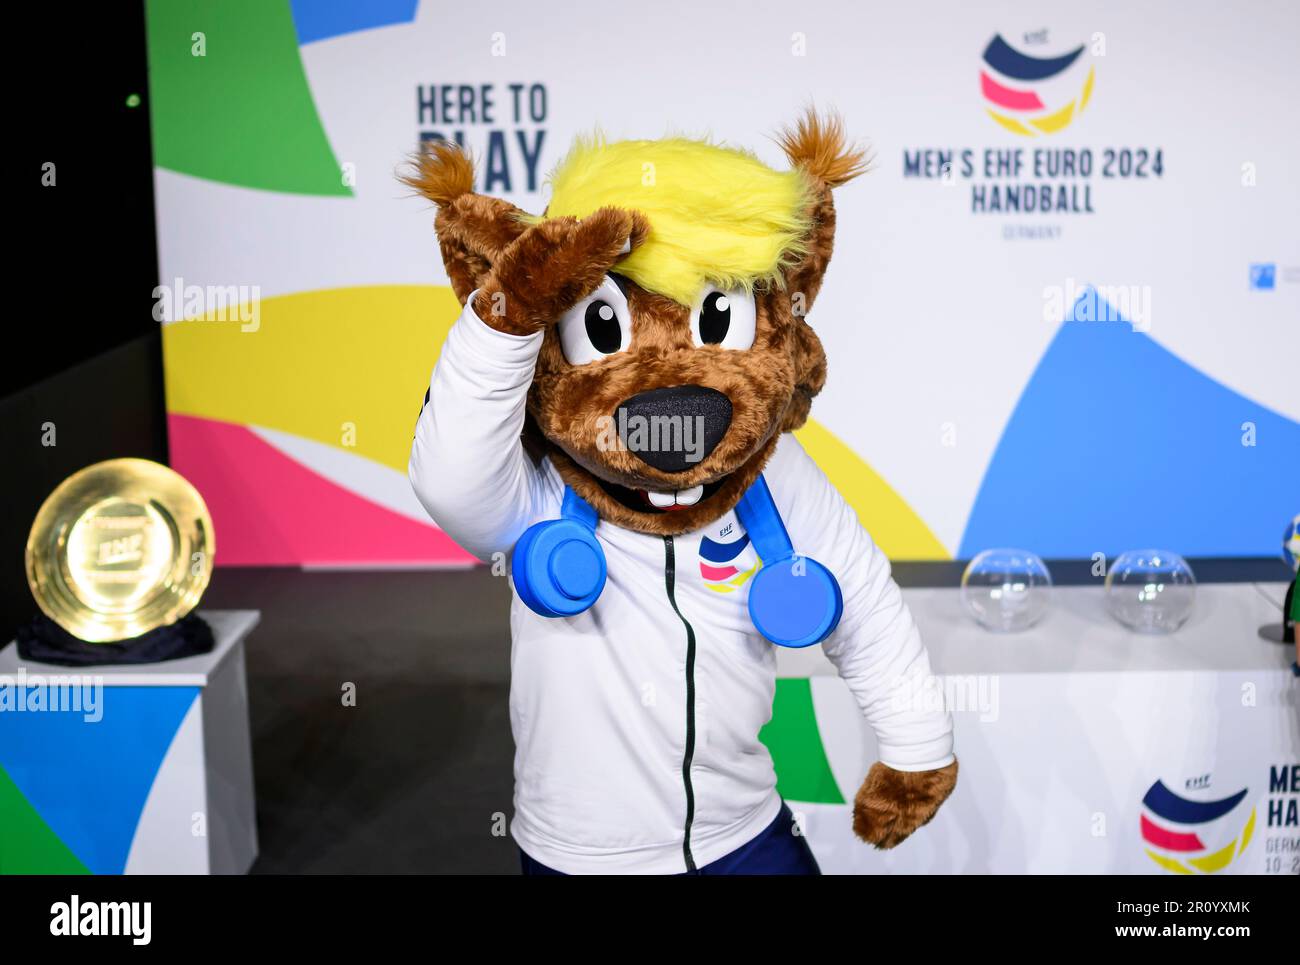 10th, for 2024, Handball, Duesseldorf/Germany Hanniball Championship the 2023 May European Stock Championship - in mascot European The Photo draw Alamy on